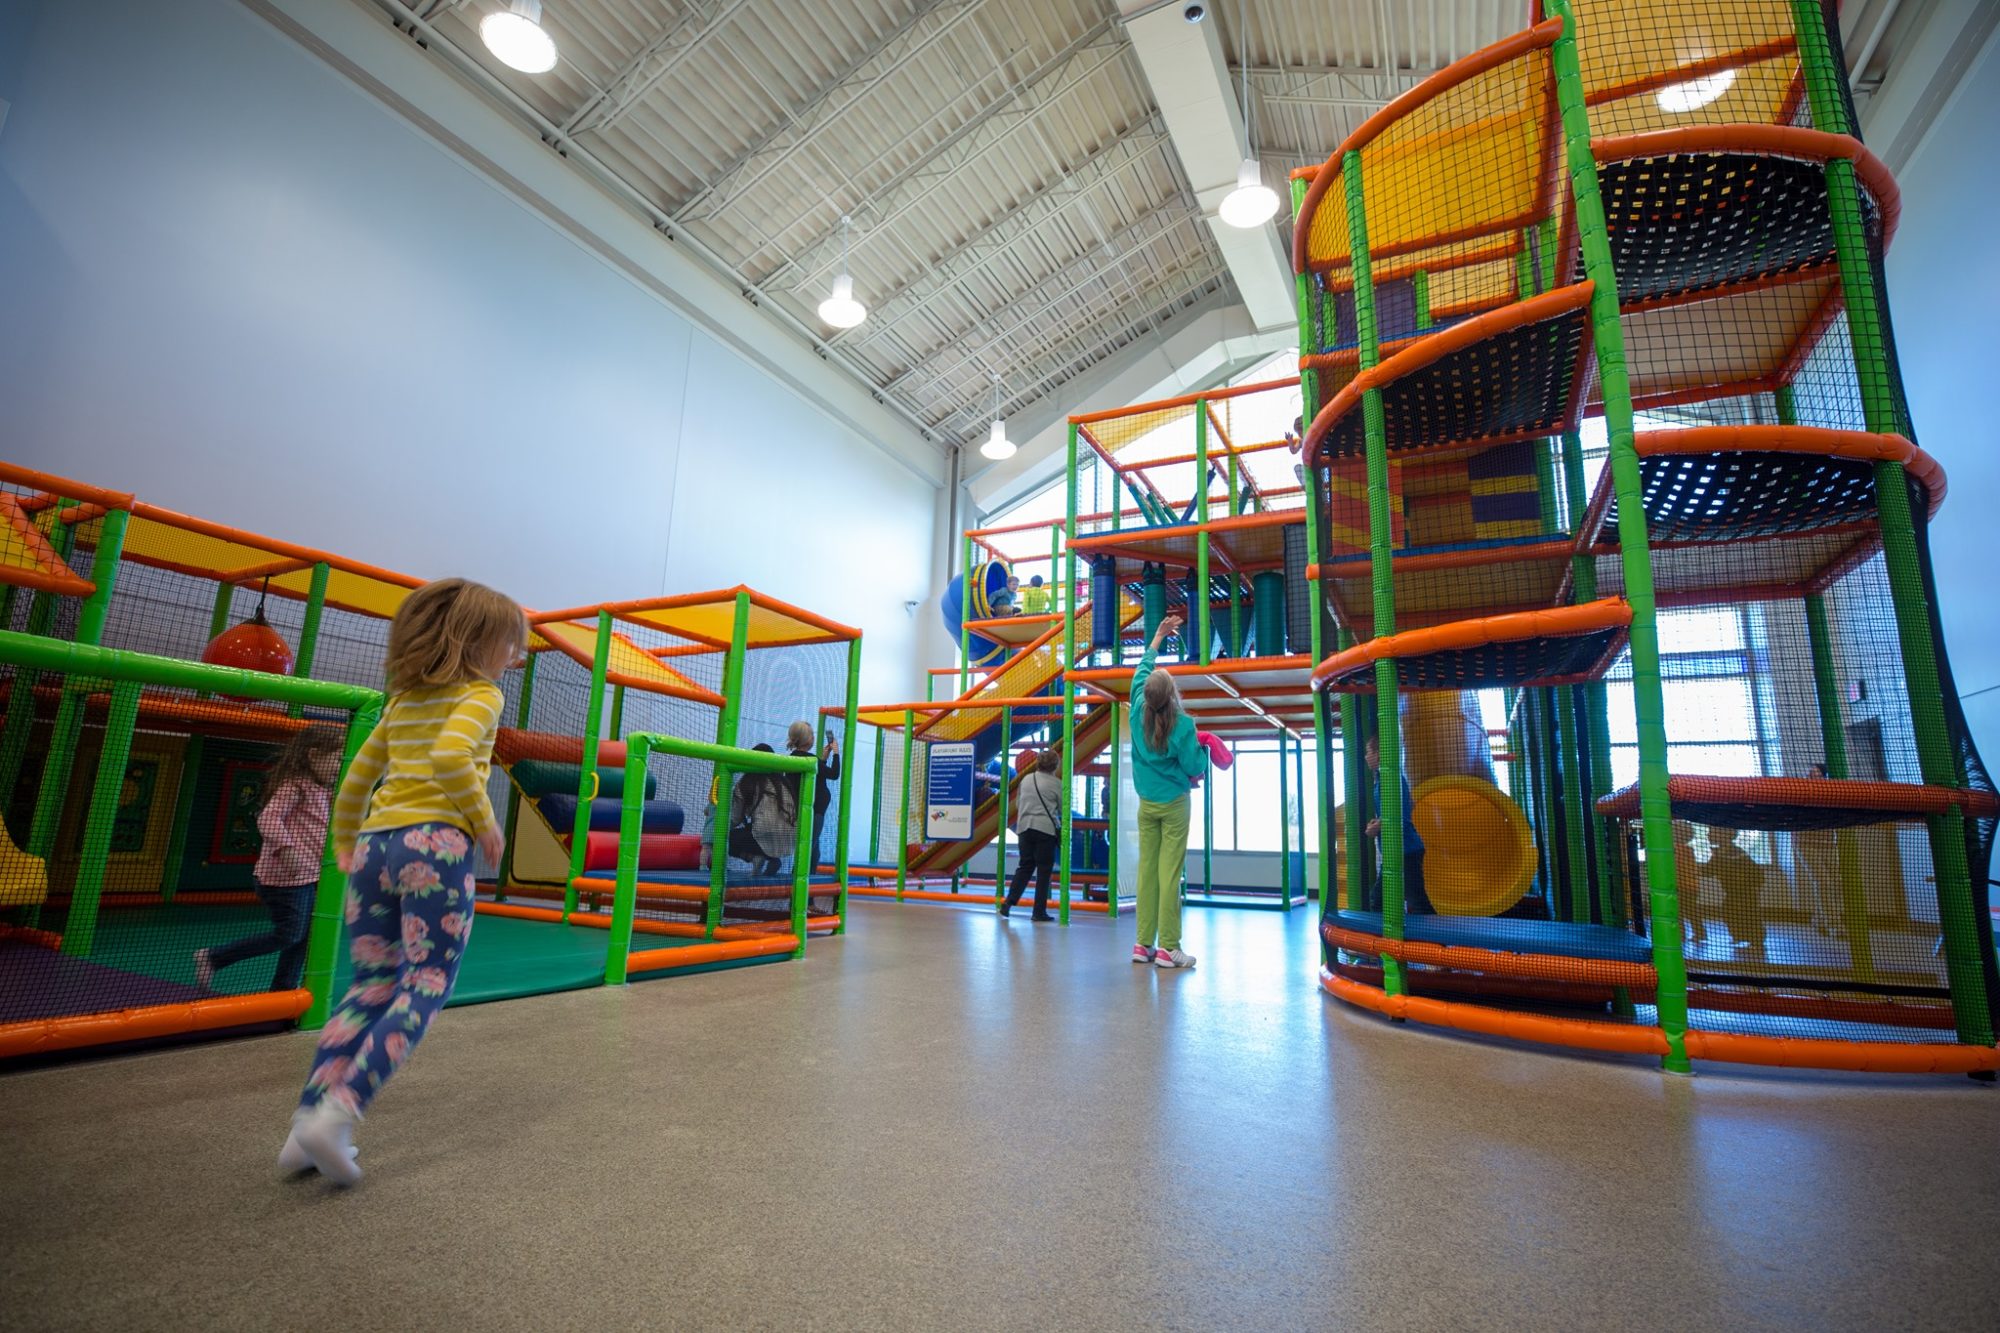 The Play Area at CLC Fishers